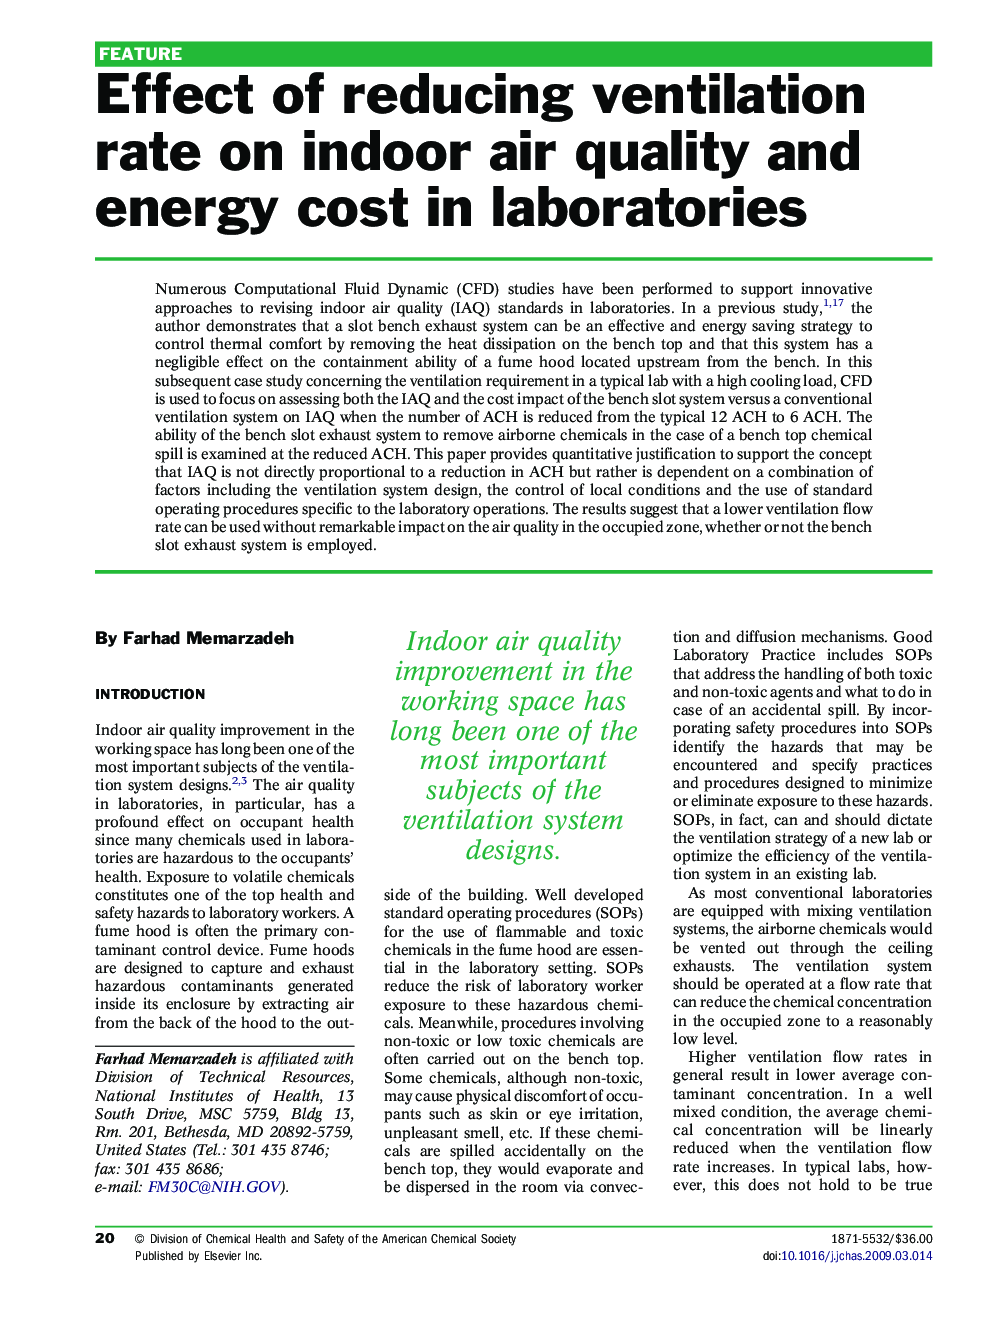 Effect of reducing ventilation rate on indoor air quality and energy cost in laboratories